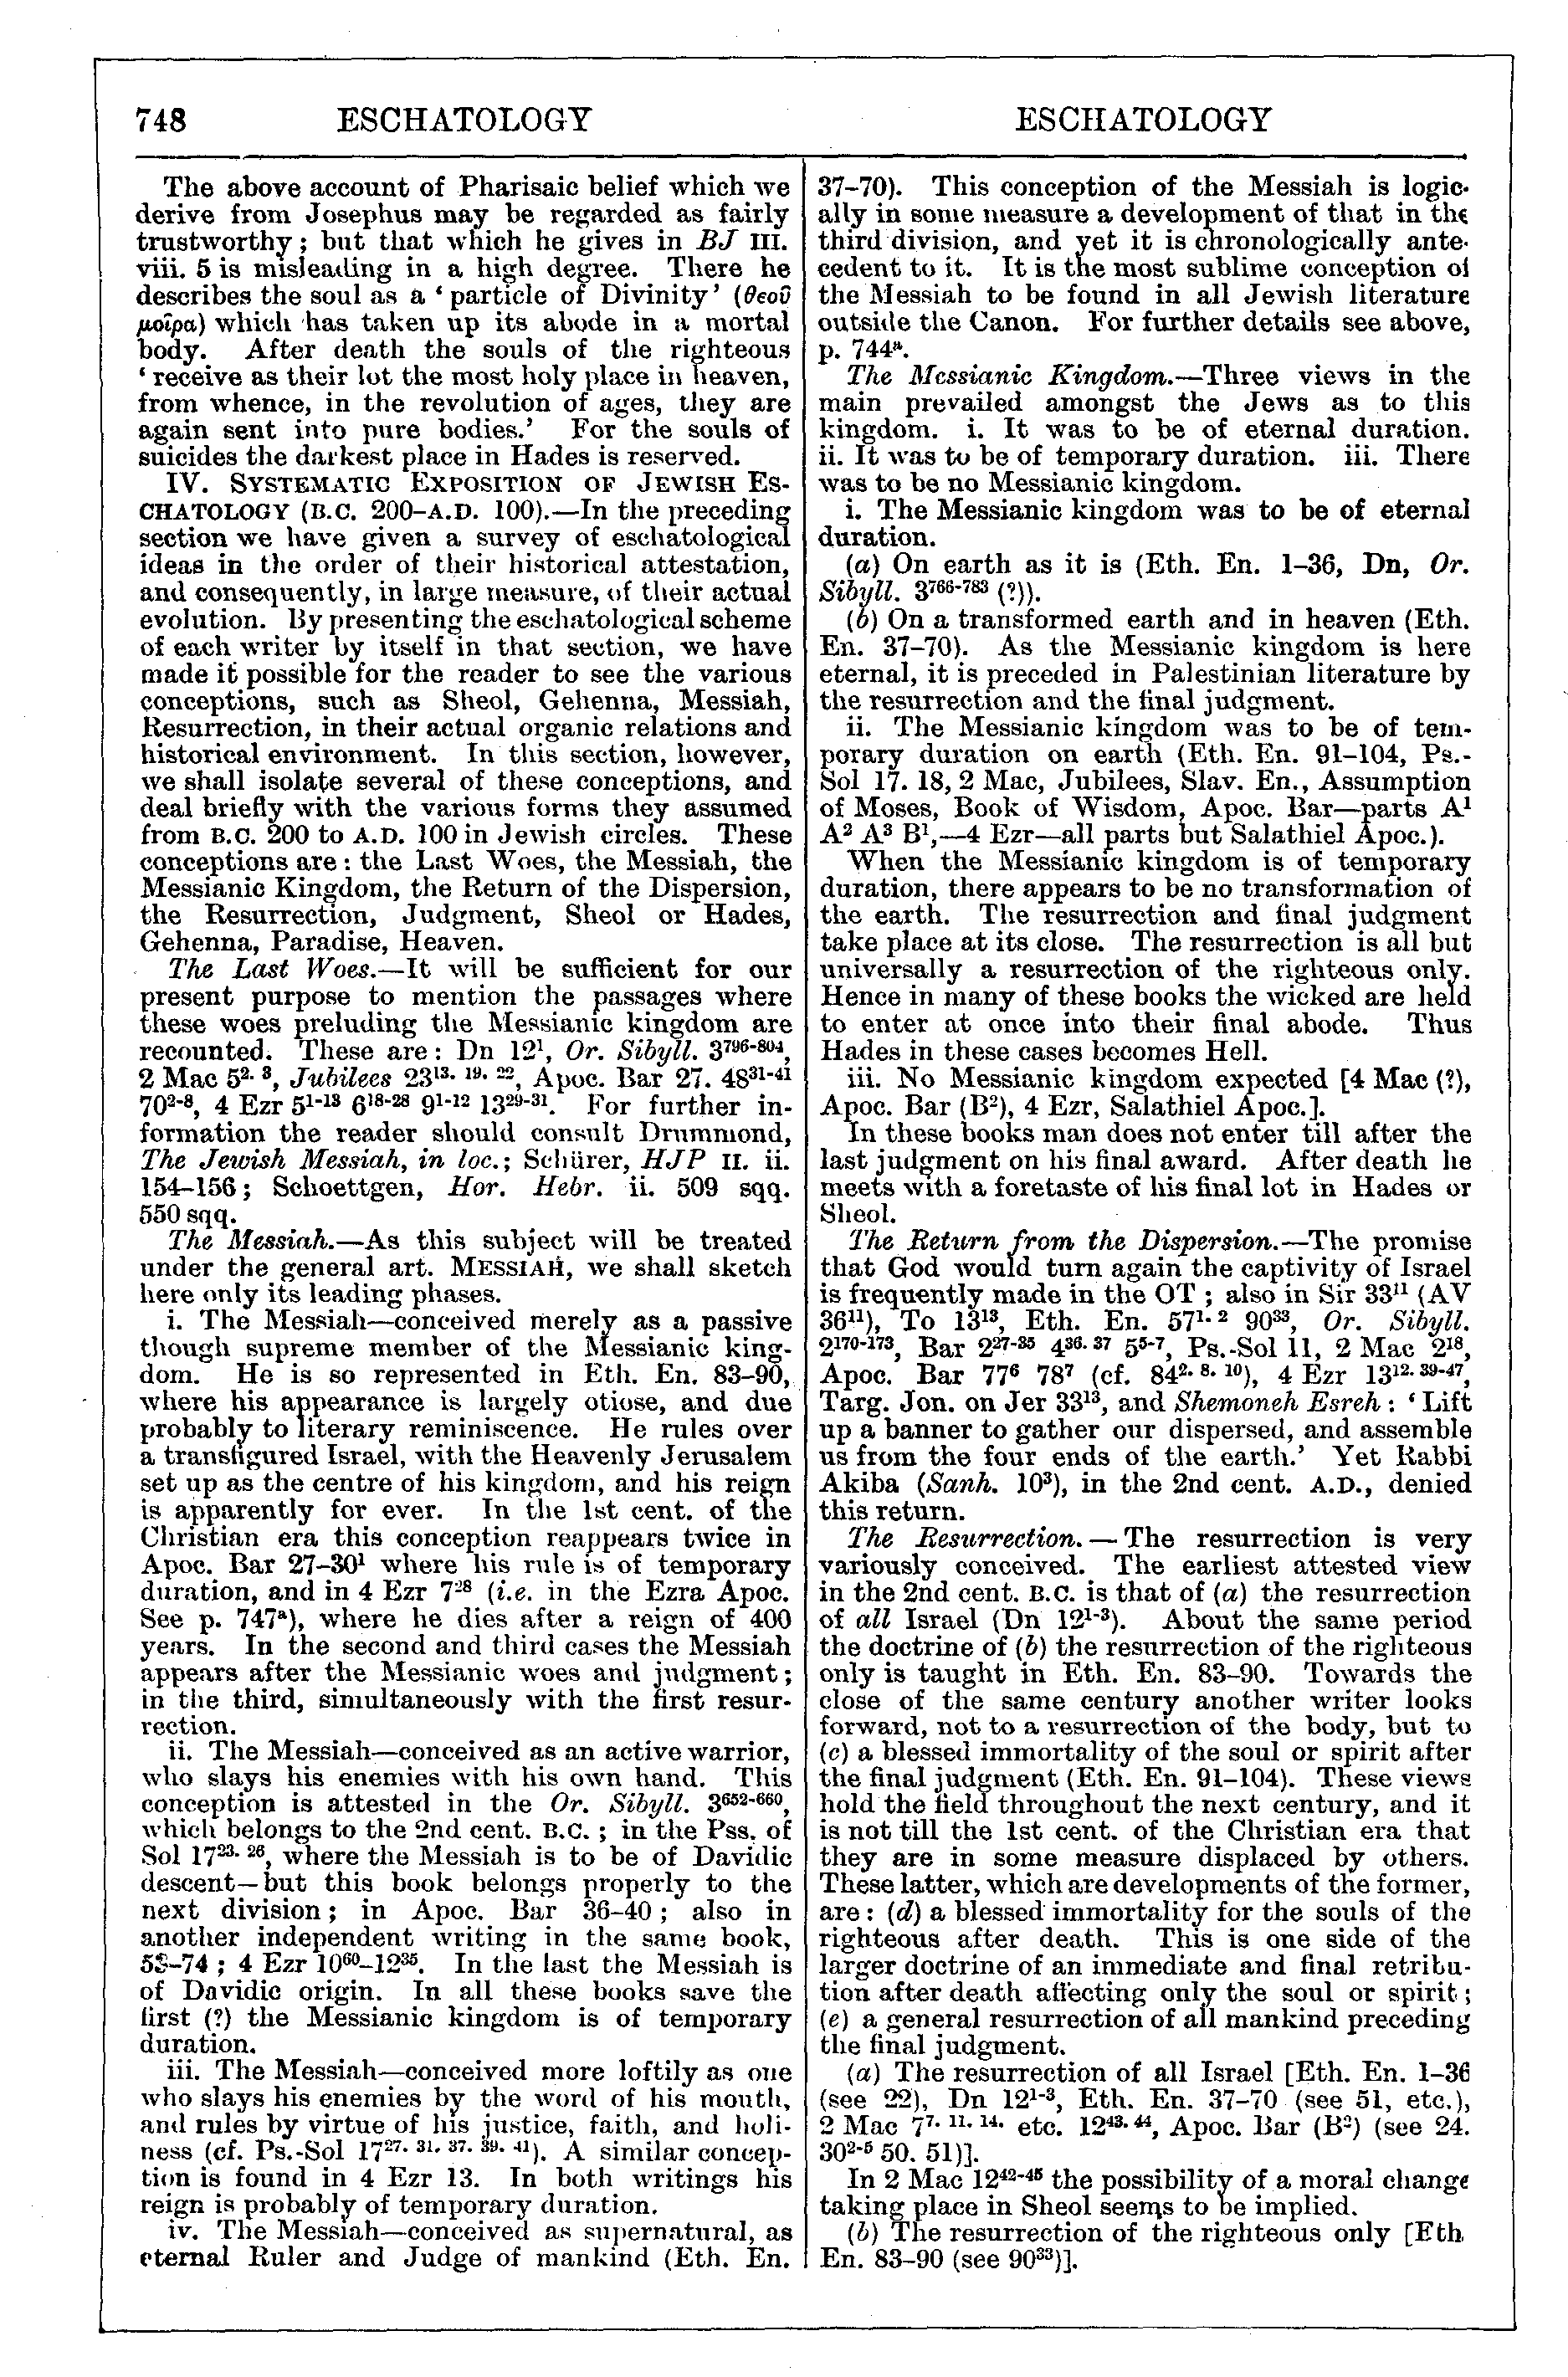 Image of page 748